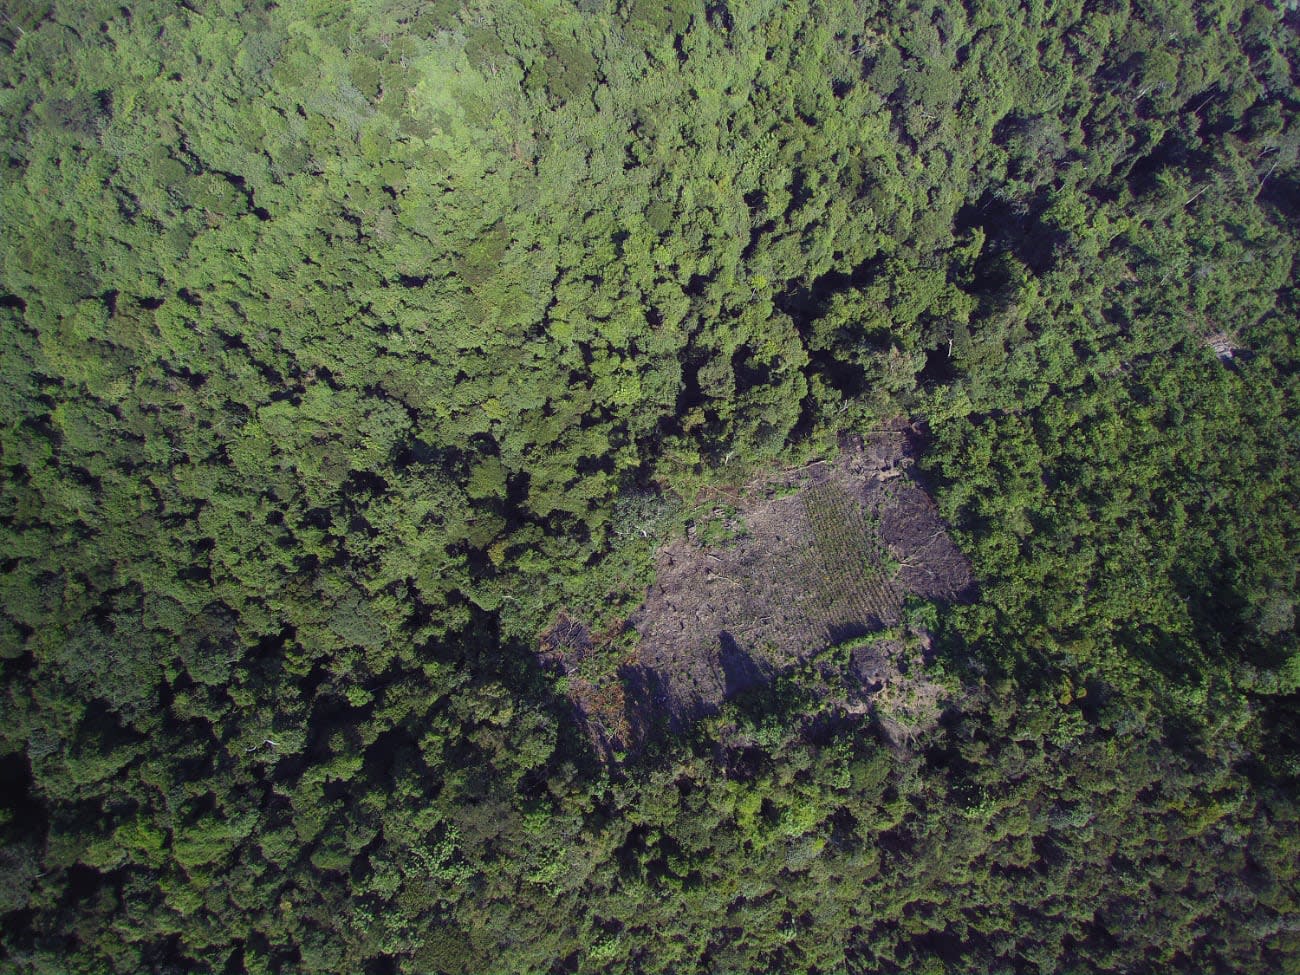 A clearing in the Republic of Congo as seen by a drone.